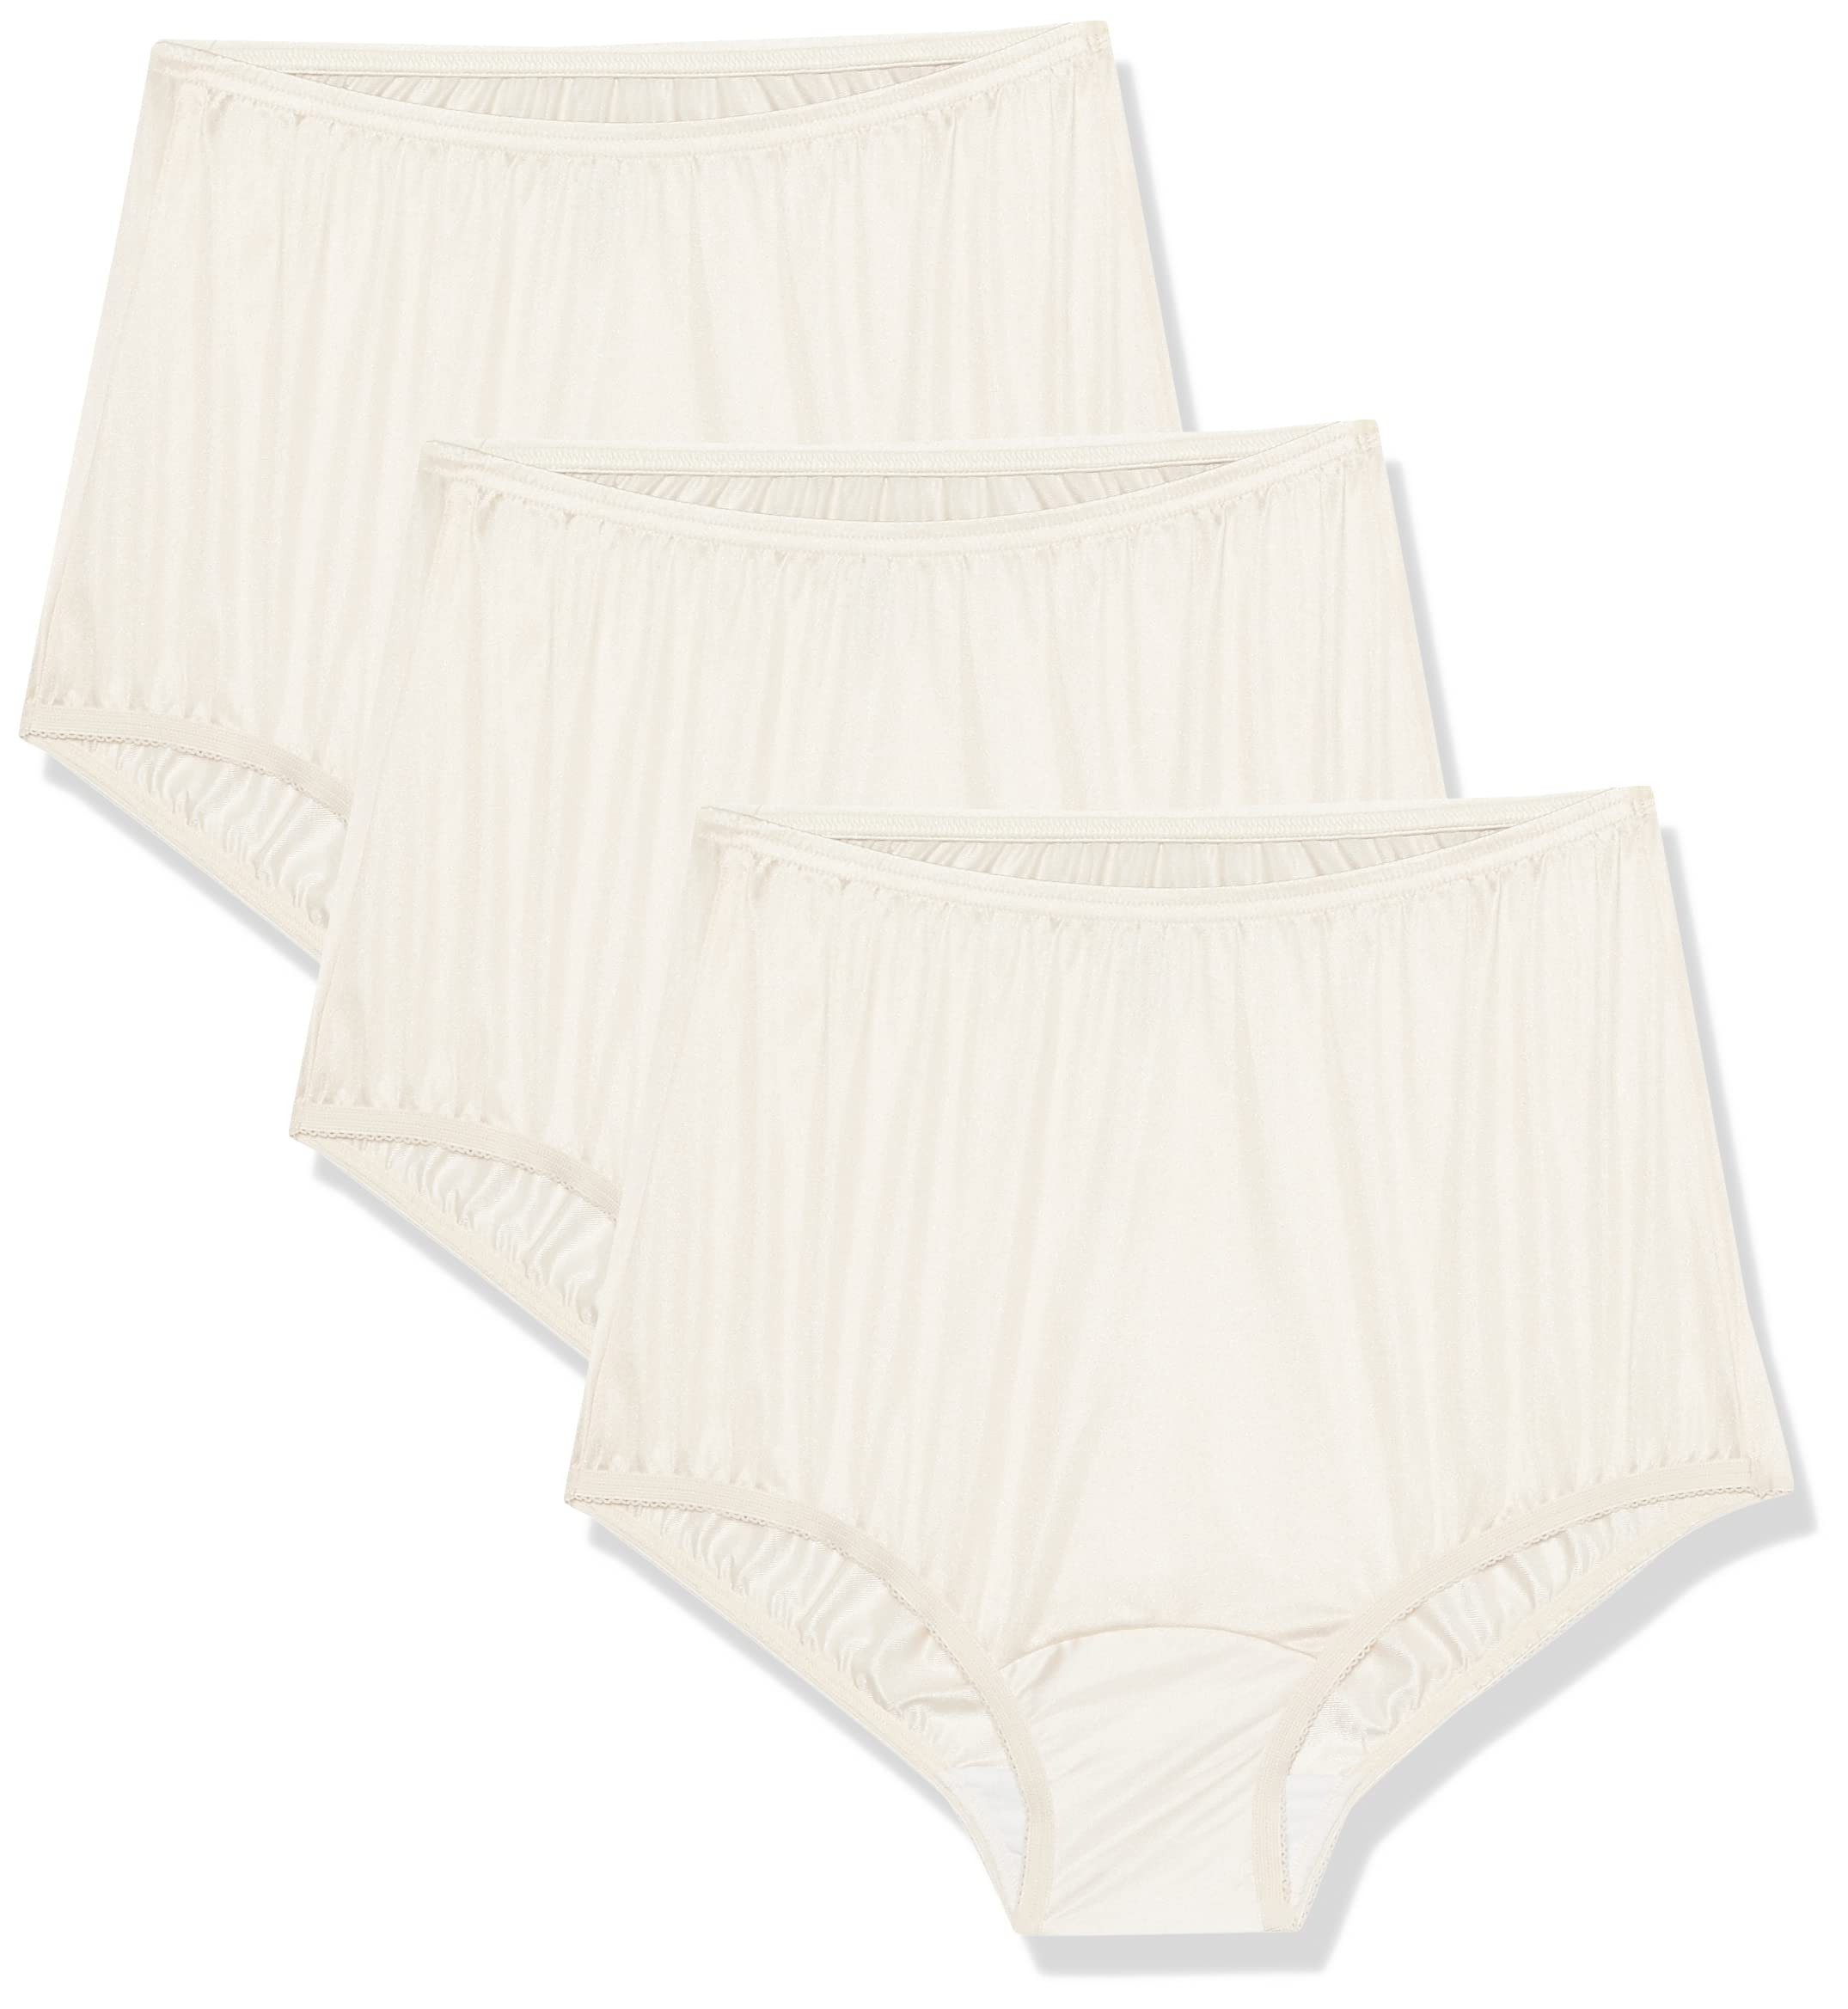 Vanity Fair womens Perfectly Yours Traditional Nylon Panties briefs underwear, 3 Pack - Fawn, 11 US